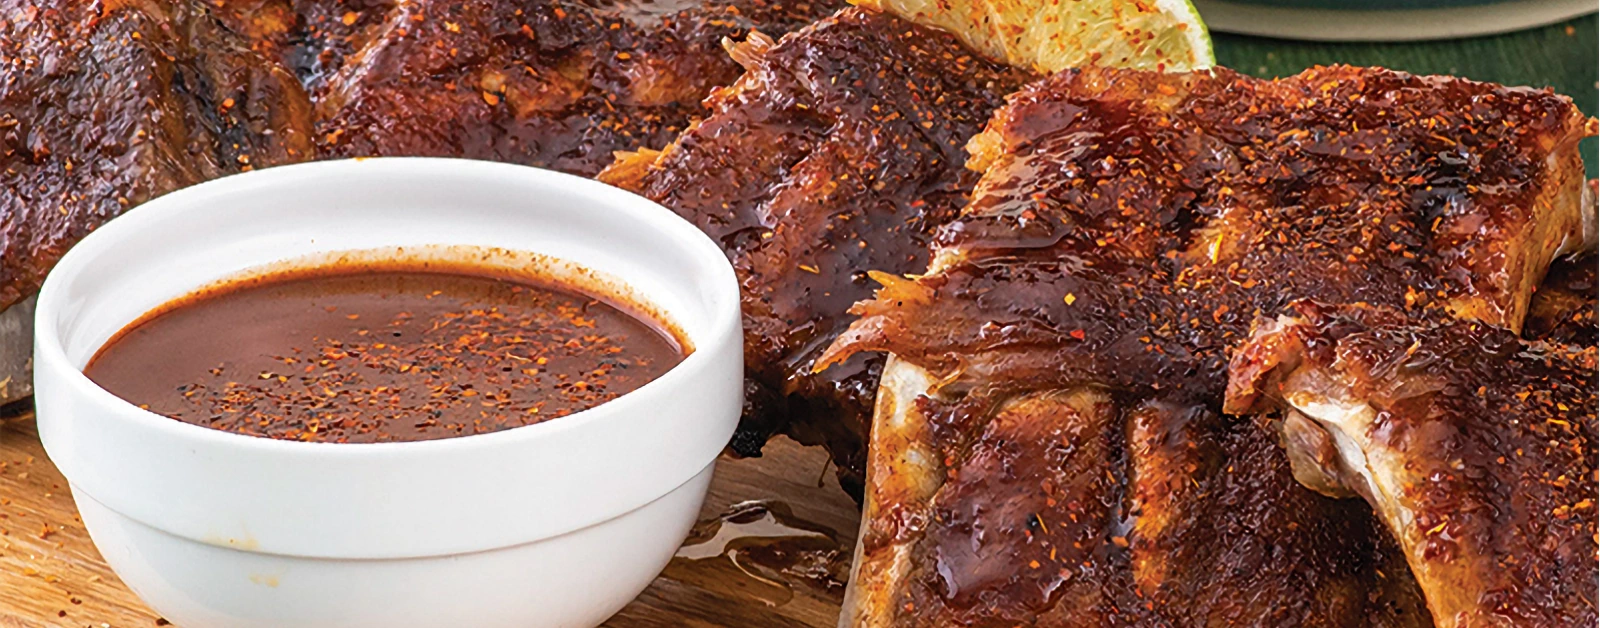 Spicy Pork Ribs Bring the Heat to Summer Cookouts